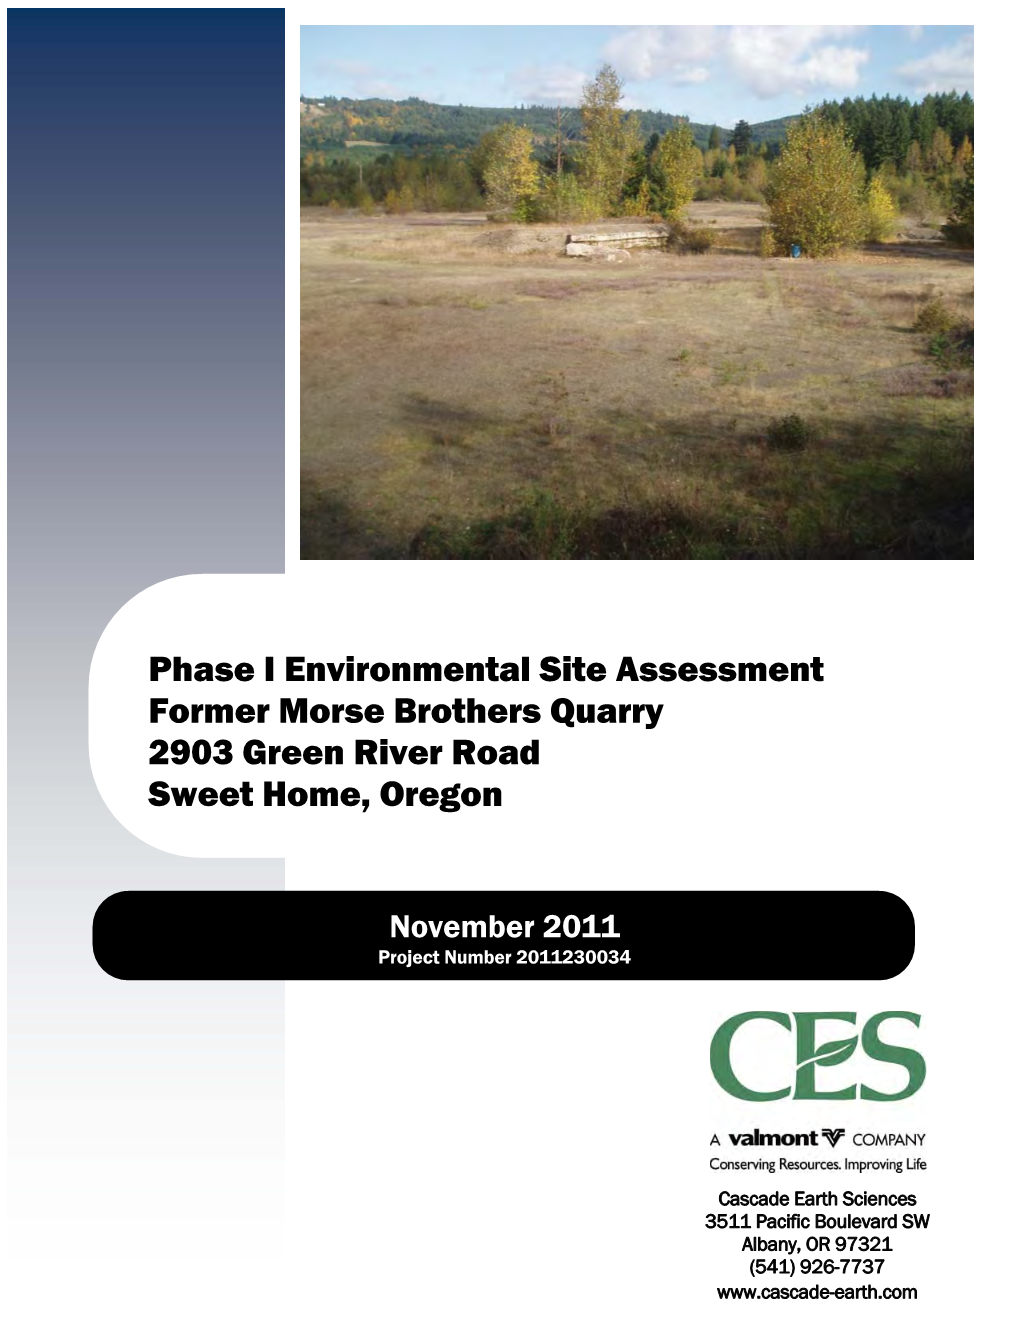 Phase I Environmental Site Assessment Former Morse Brothers Quarry 2903 Green River Road Sweet Home, Oregon